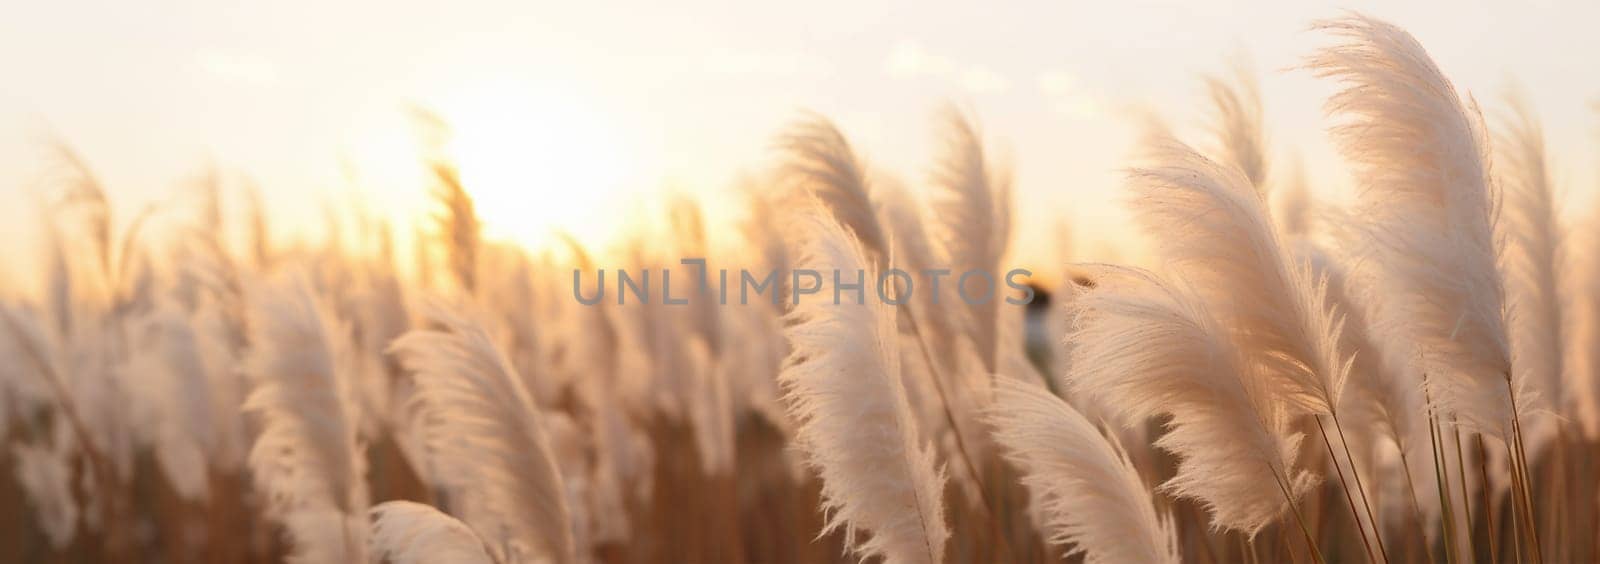 Pampas grass in the sky, Abstract natural background of soft plants Cortaderia selloana moving in the wind. Bright and clear scene of plants similar to feather dusters. beauty. Abstract natural background boho design by Annebel146